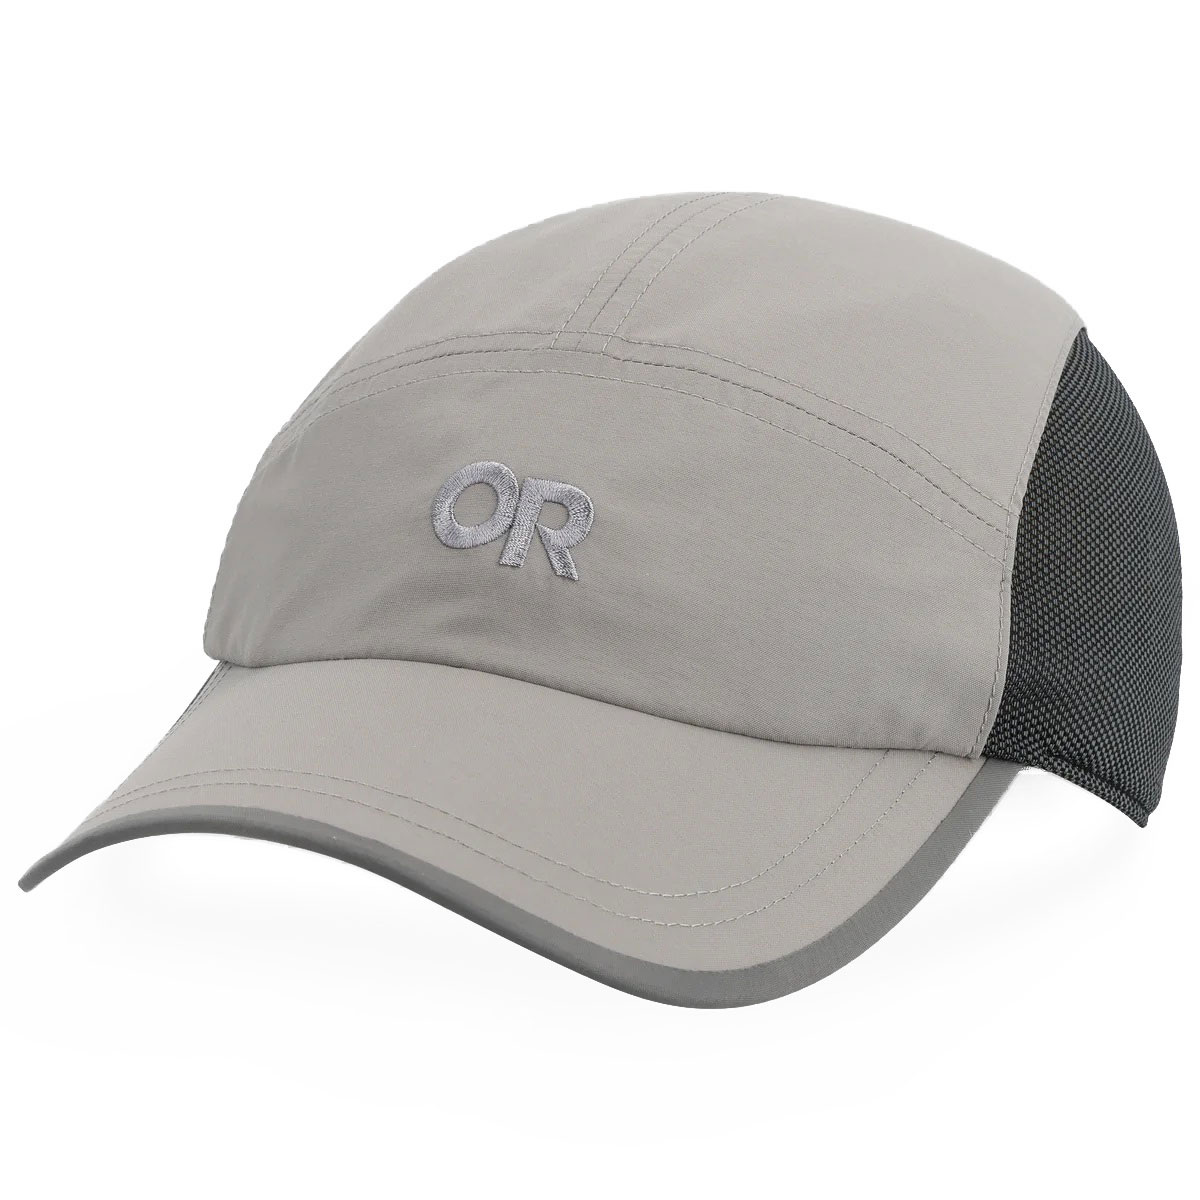 Picture of Outdoor Research Swift Cap - pewter/dark grey